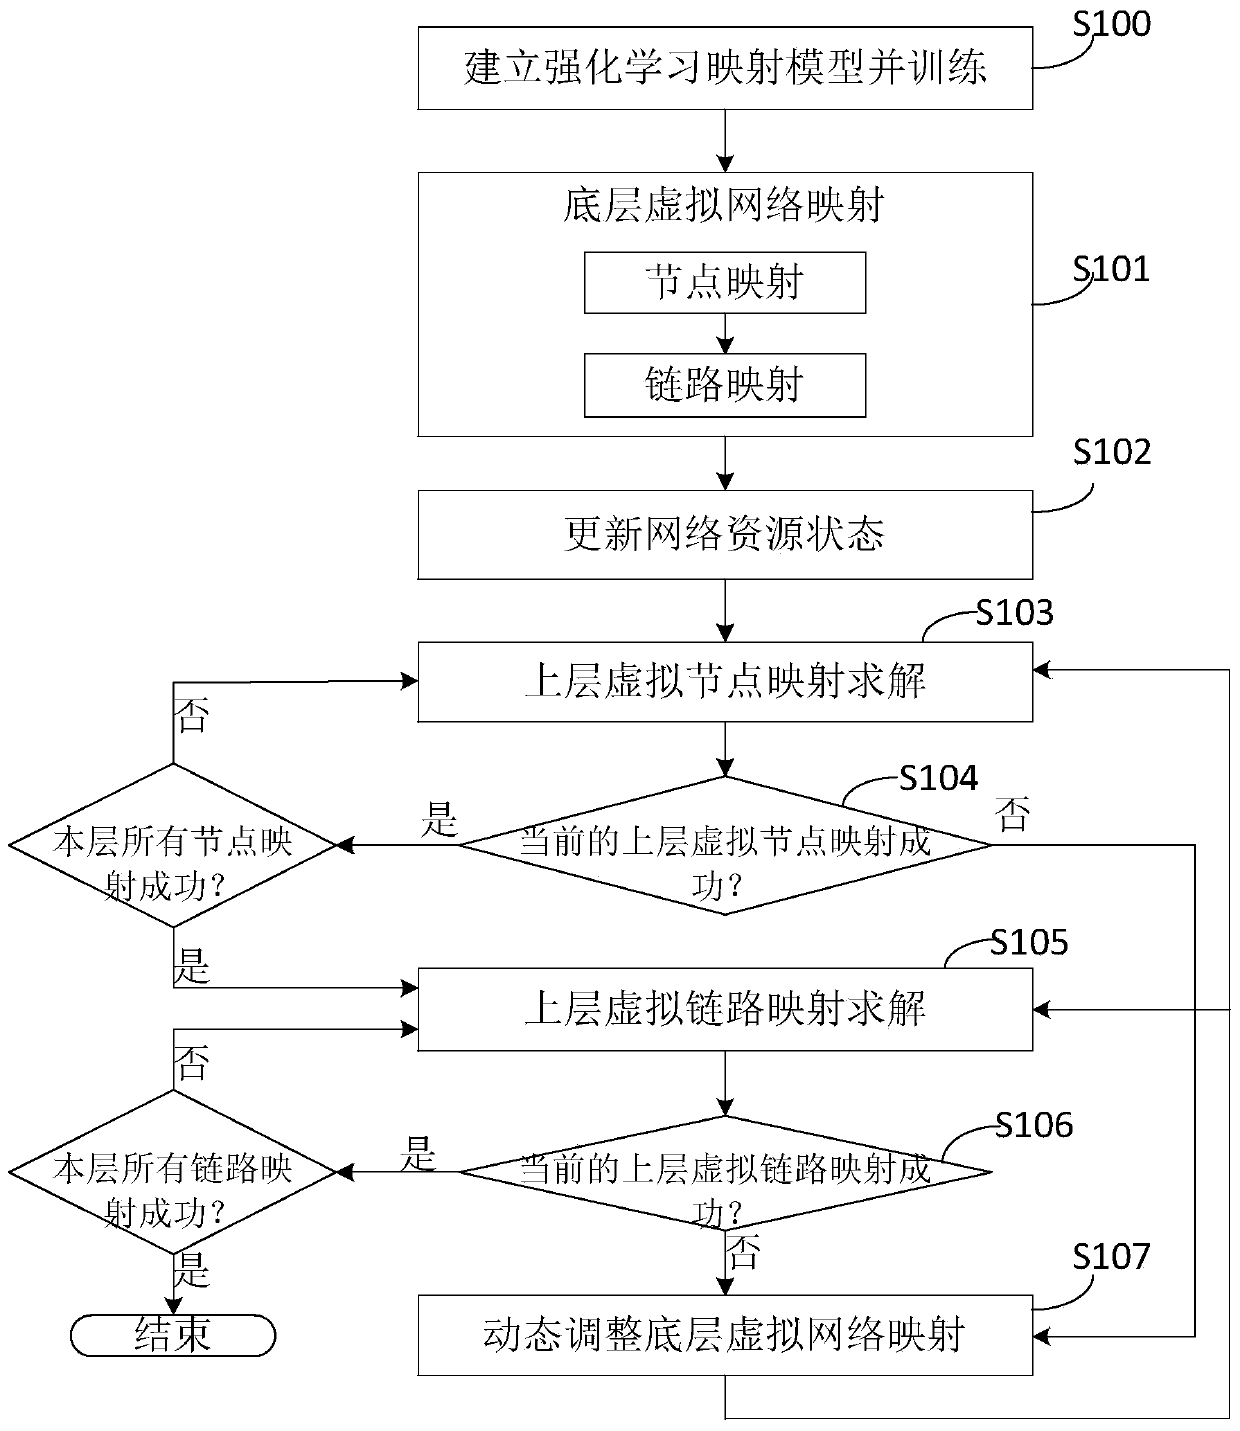 SDN multistage virtual network mapping method and device based on reinforcement learning